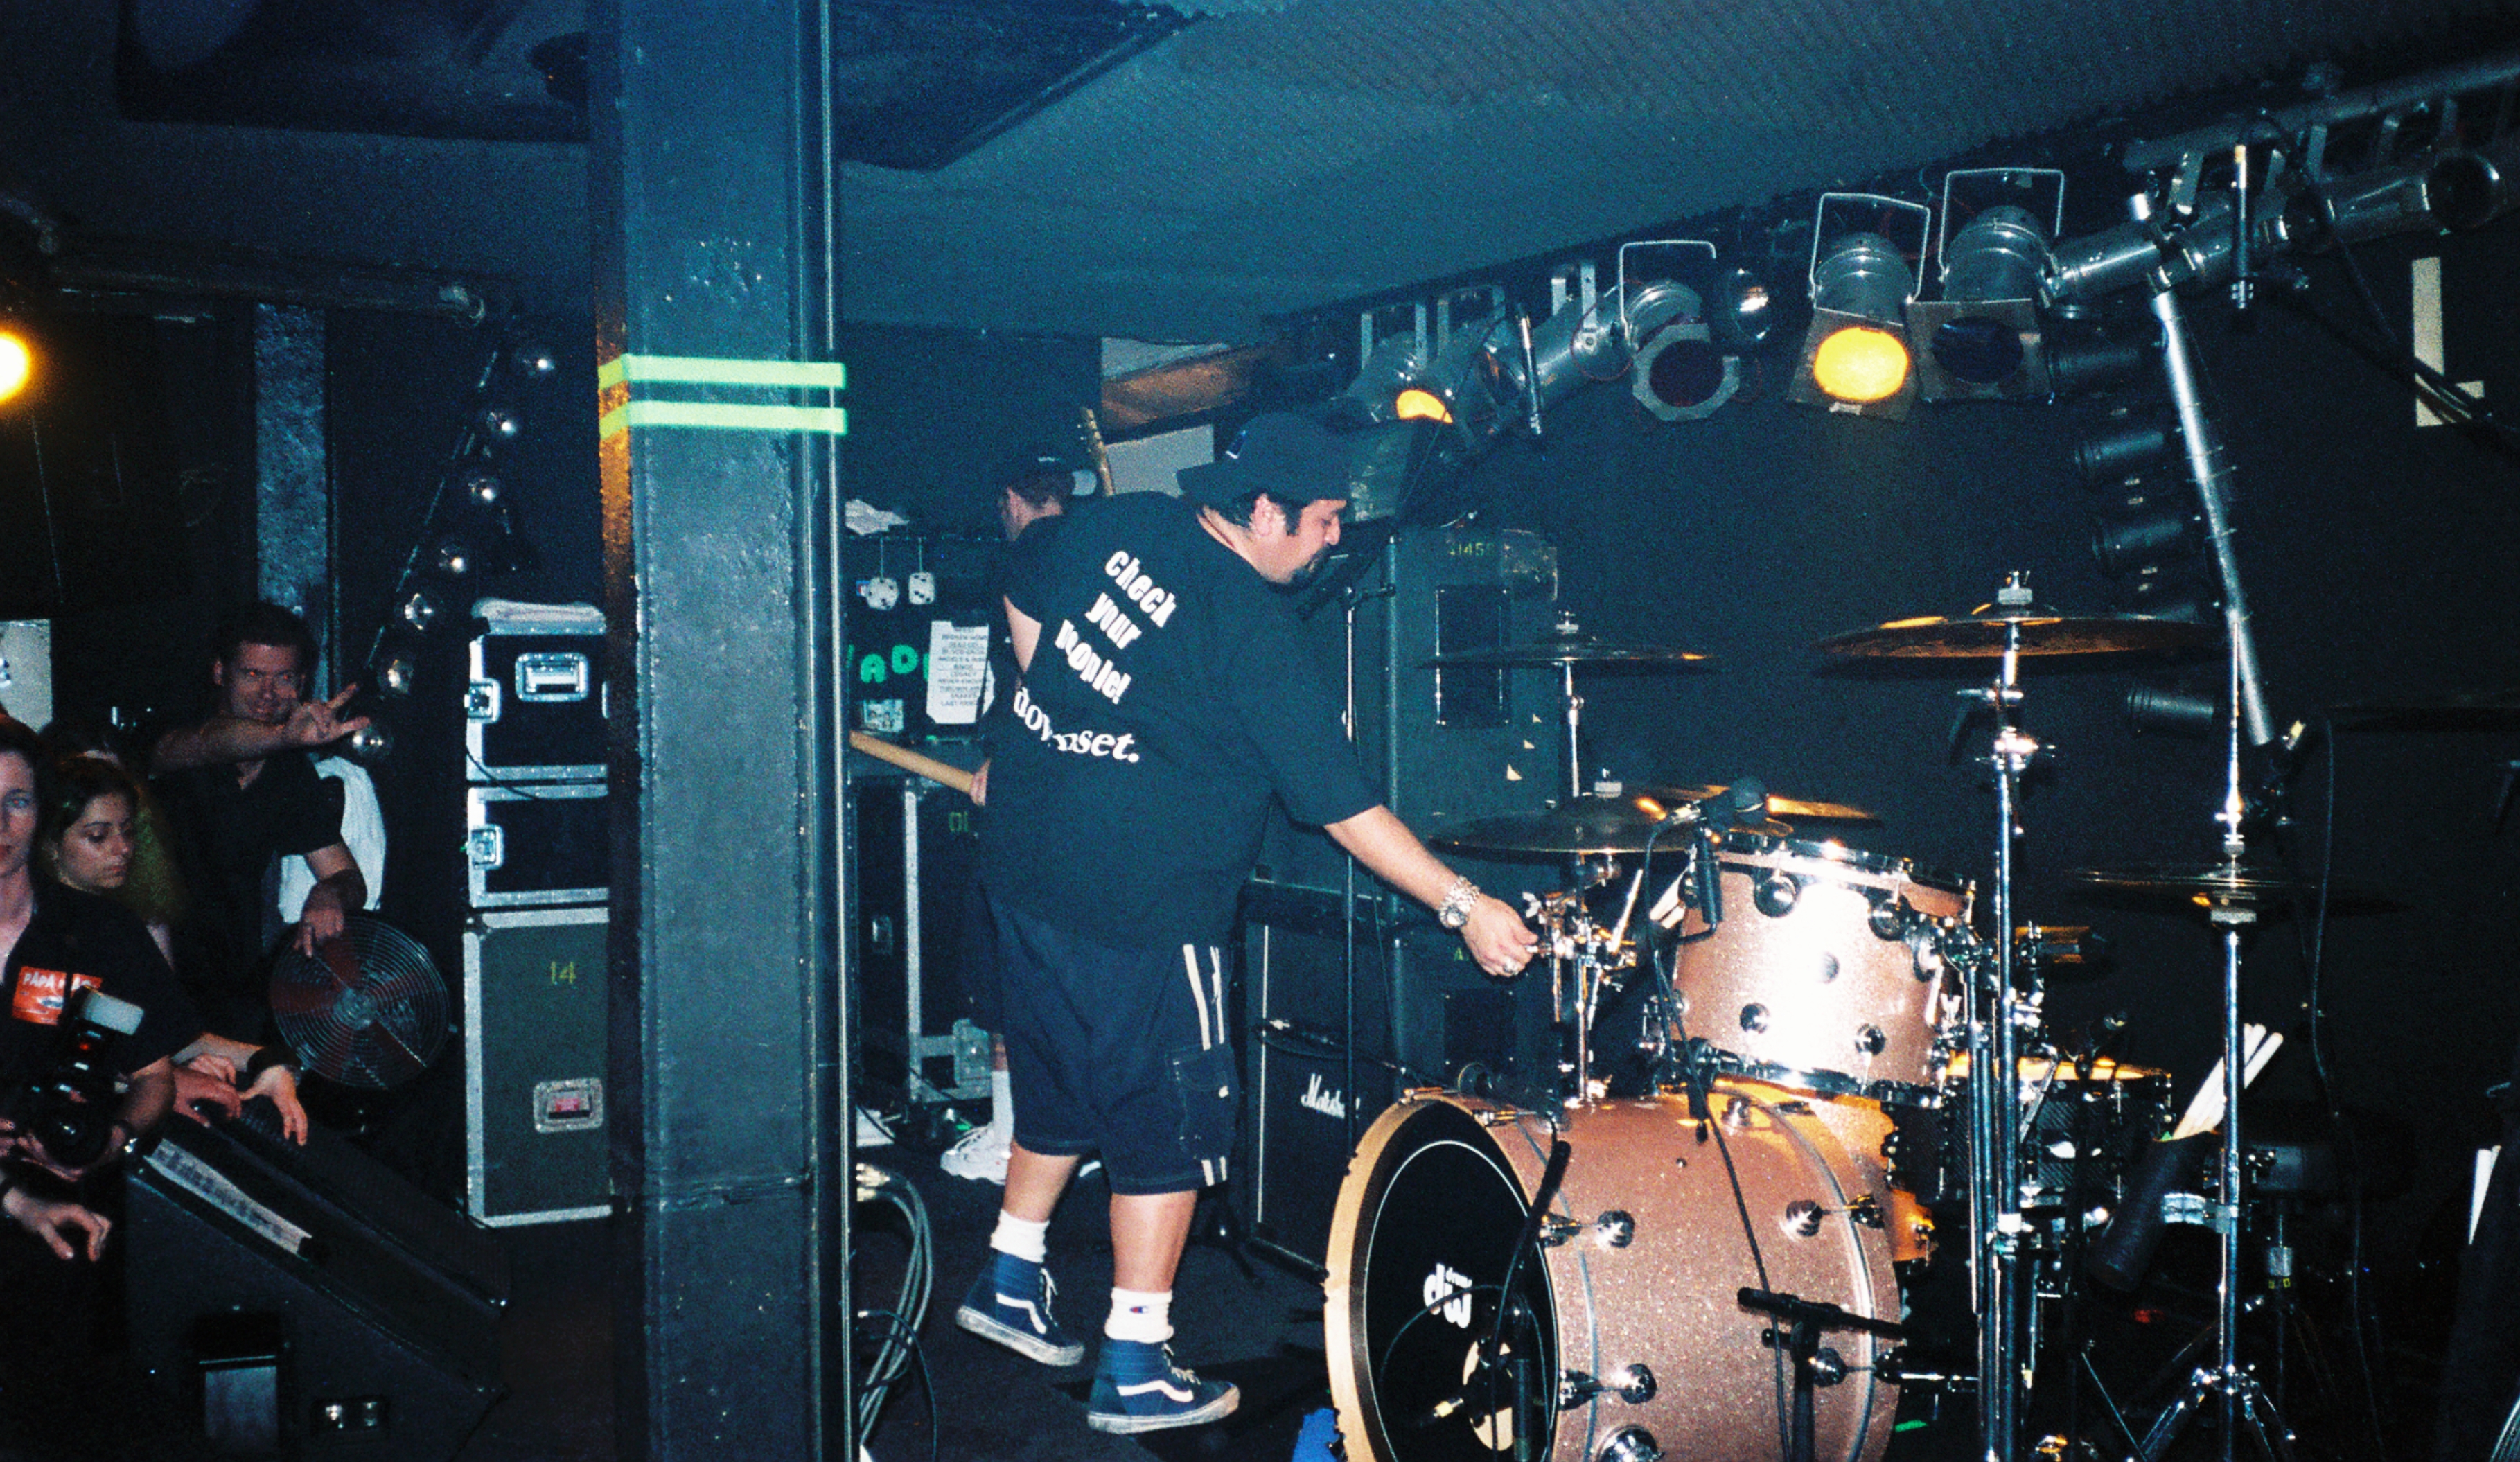 The Papa Roach drum tech adjusts the drums in preparation for the headliner